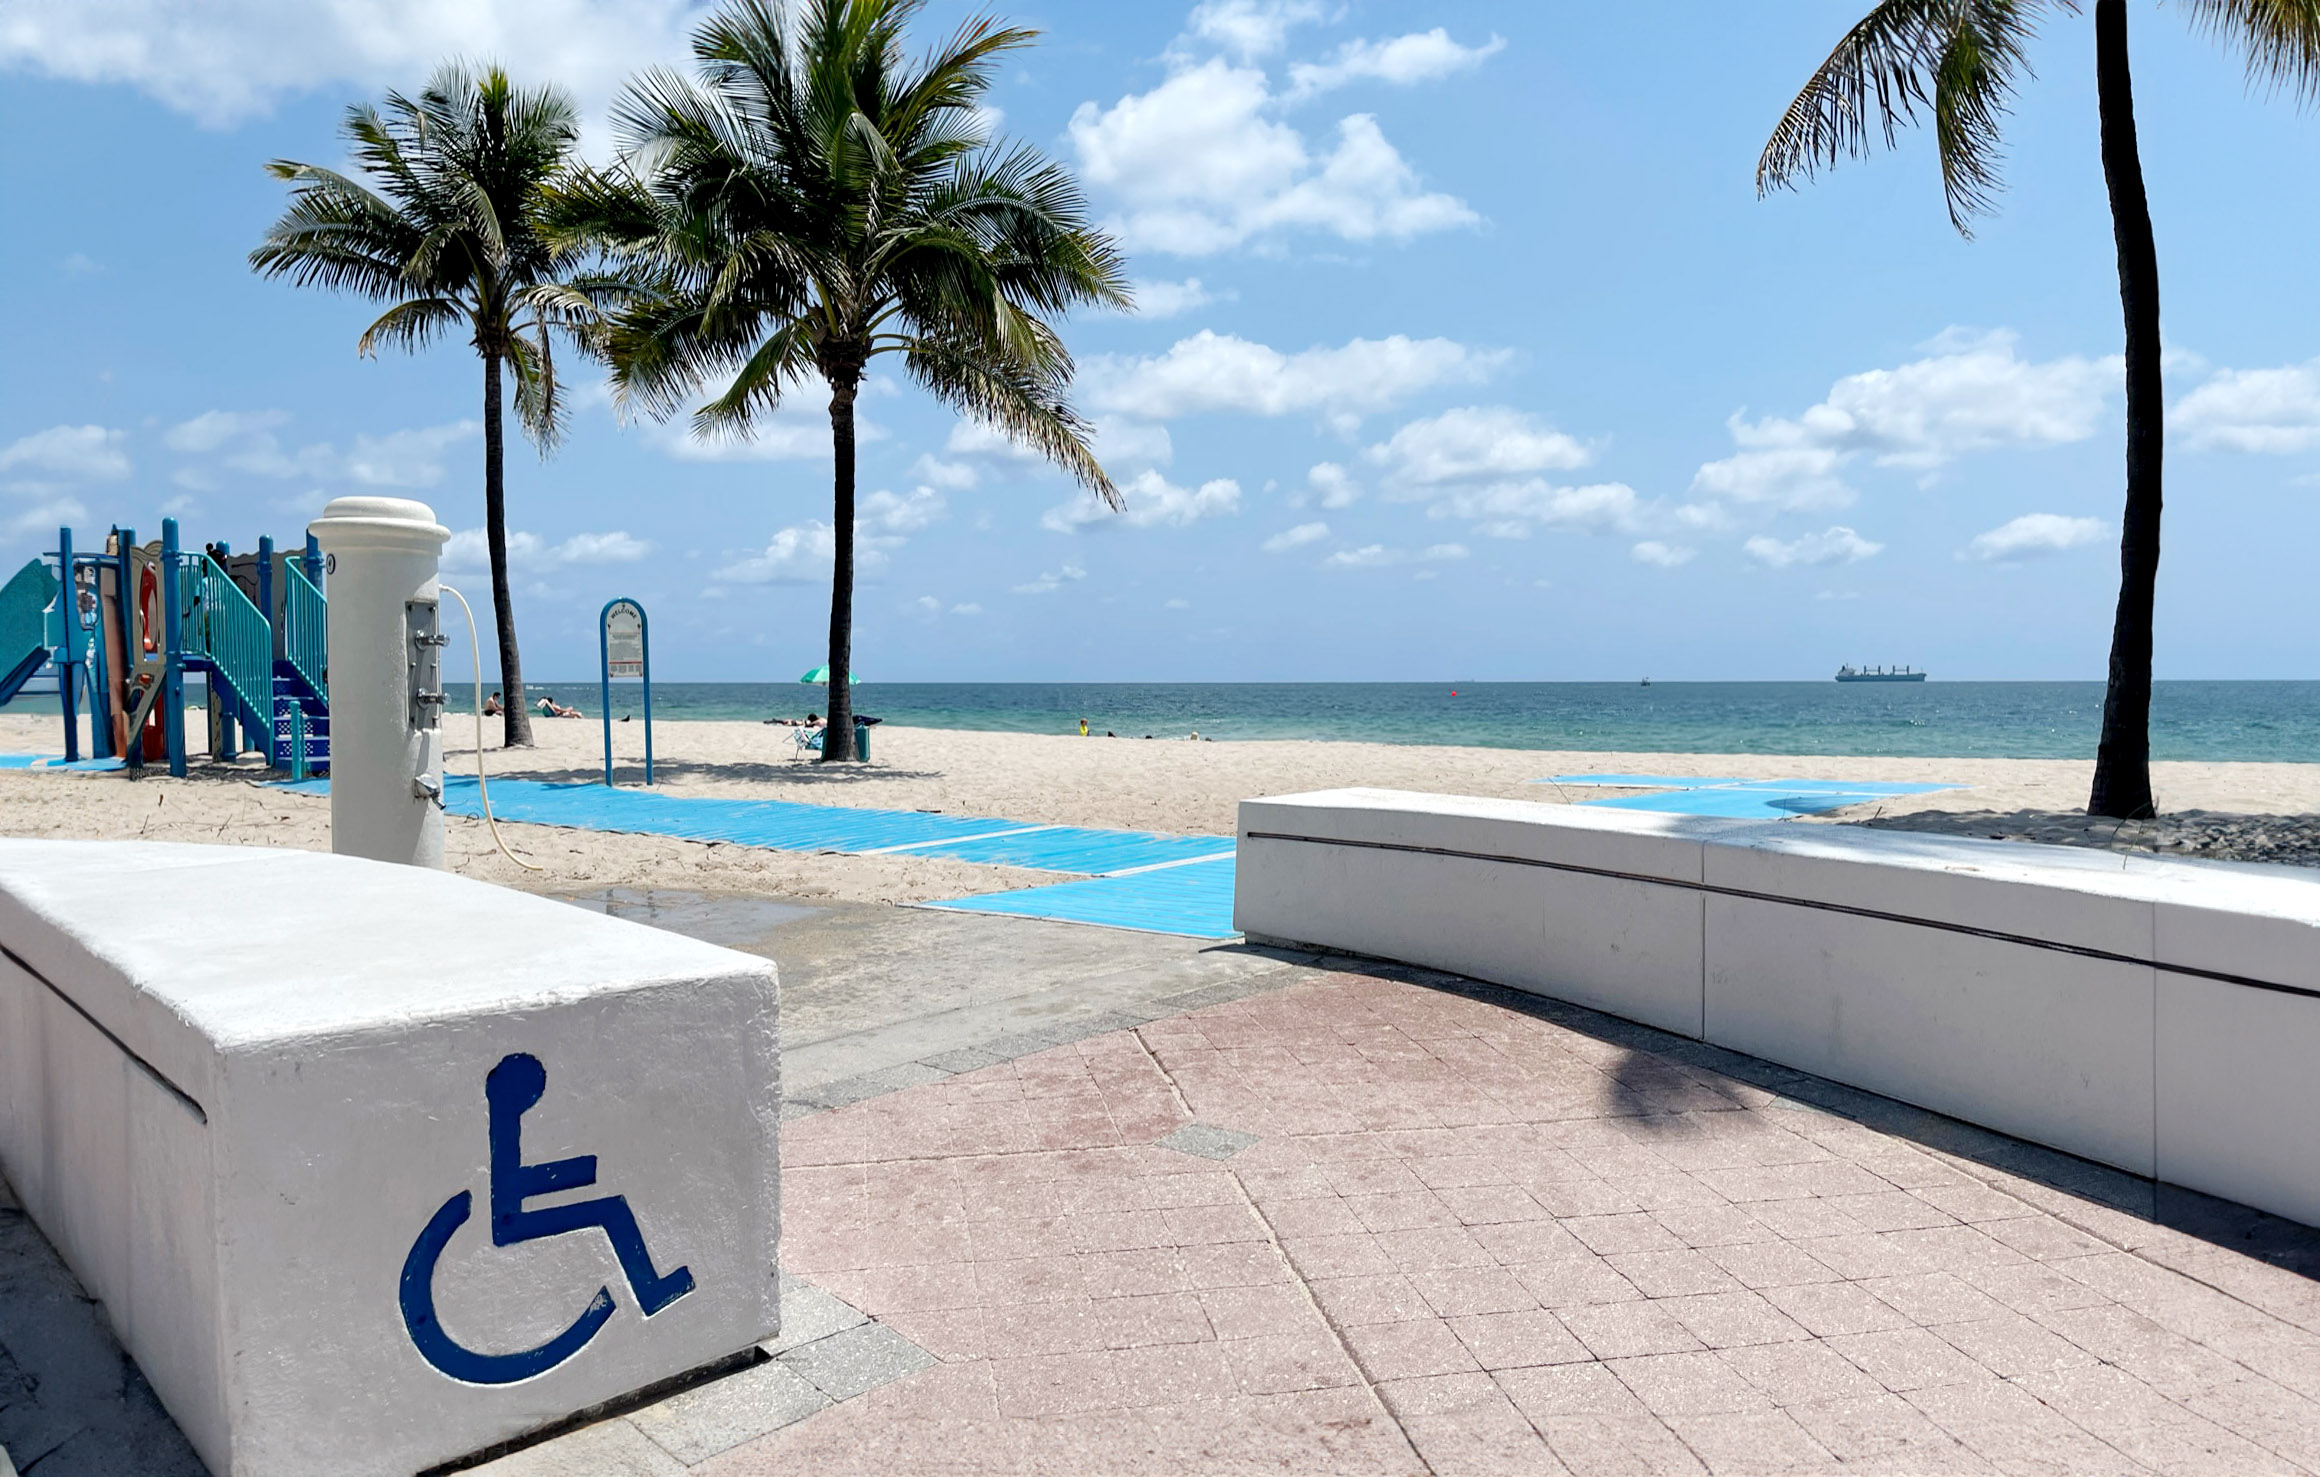 image of wheelchair entrance at beach with mobi mat